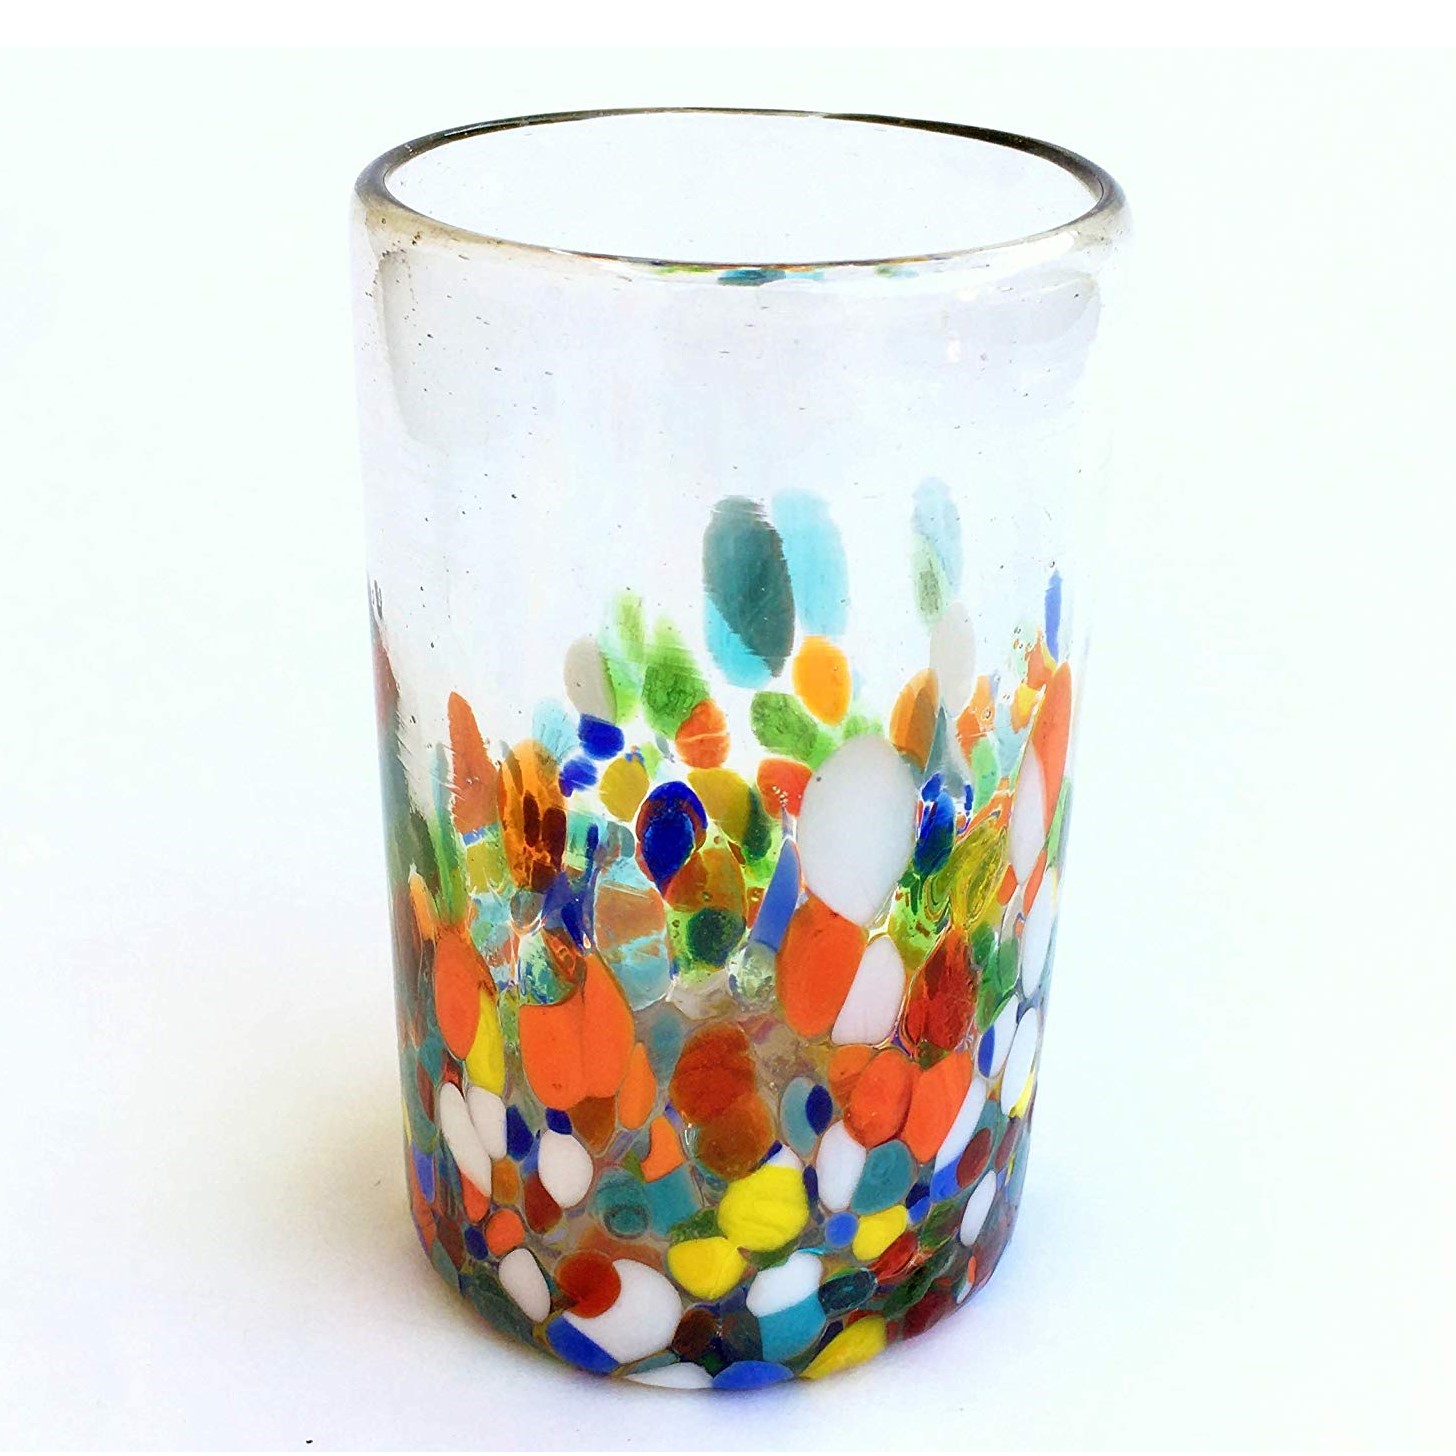 Wholesale Mexican Glasses / Clear & Confetti 14 oz Drinking Glasses  / Our Clear & Confetti drinking glasses combine the best of two worlds: clear, thick, sturdy handcrafted glass on top, meets the colorful, festive, confetti bottom! These glasses will sure be a standout in any table setting or as a fabulous gift for your loved ones. Crafted one by one by skilled artisans in Tonala, Mexico, each glass is different from the next making them unique works of art. You'll be amazed at how they make having a simple glass of water a happier experience. Each glass holds approximately 14 oz of liquid and stands a bit over 5